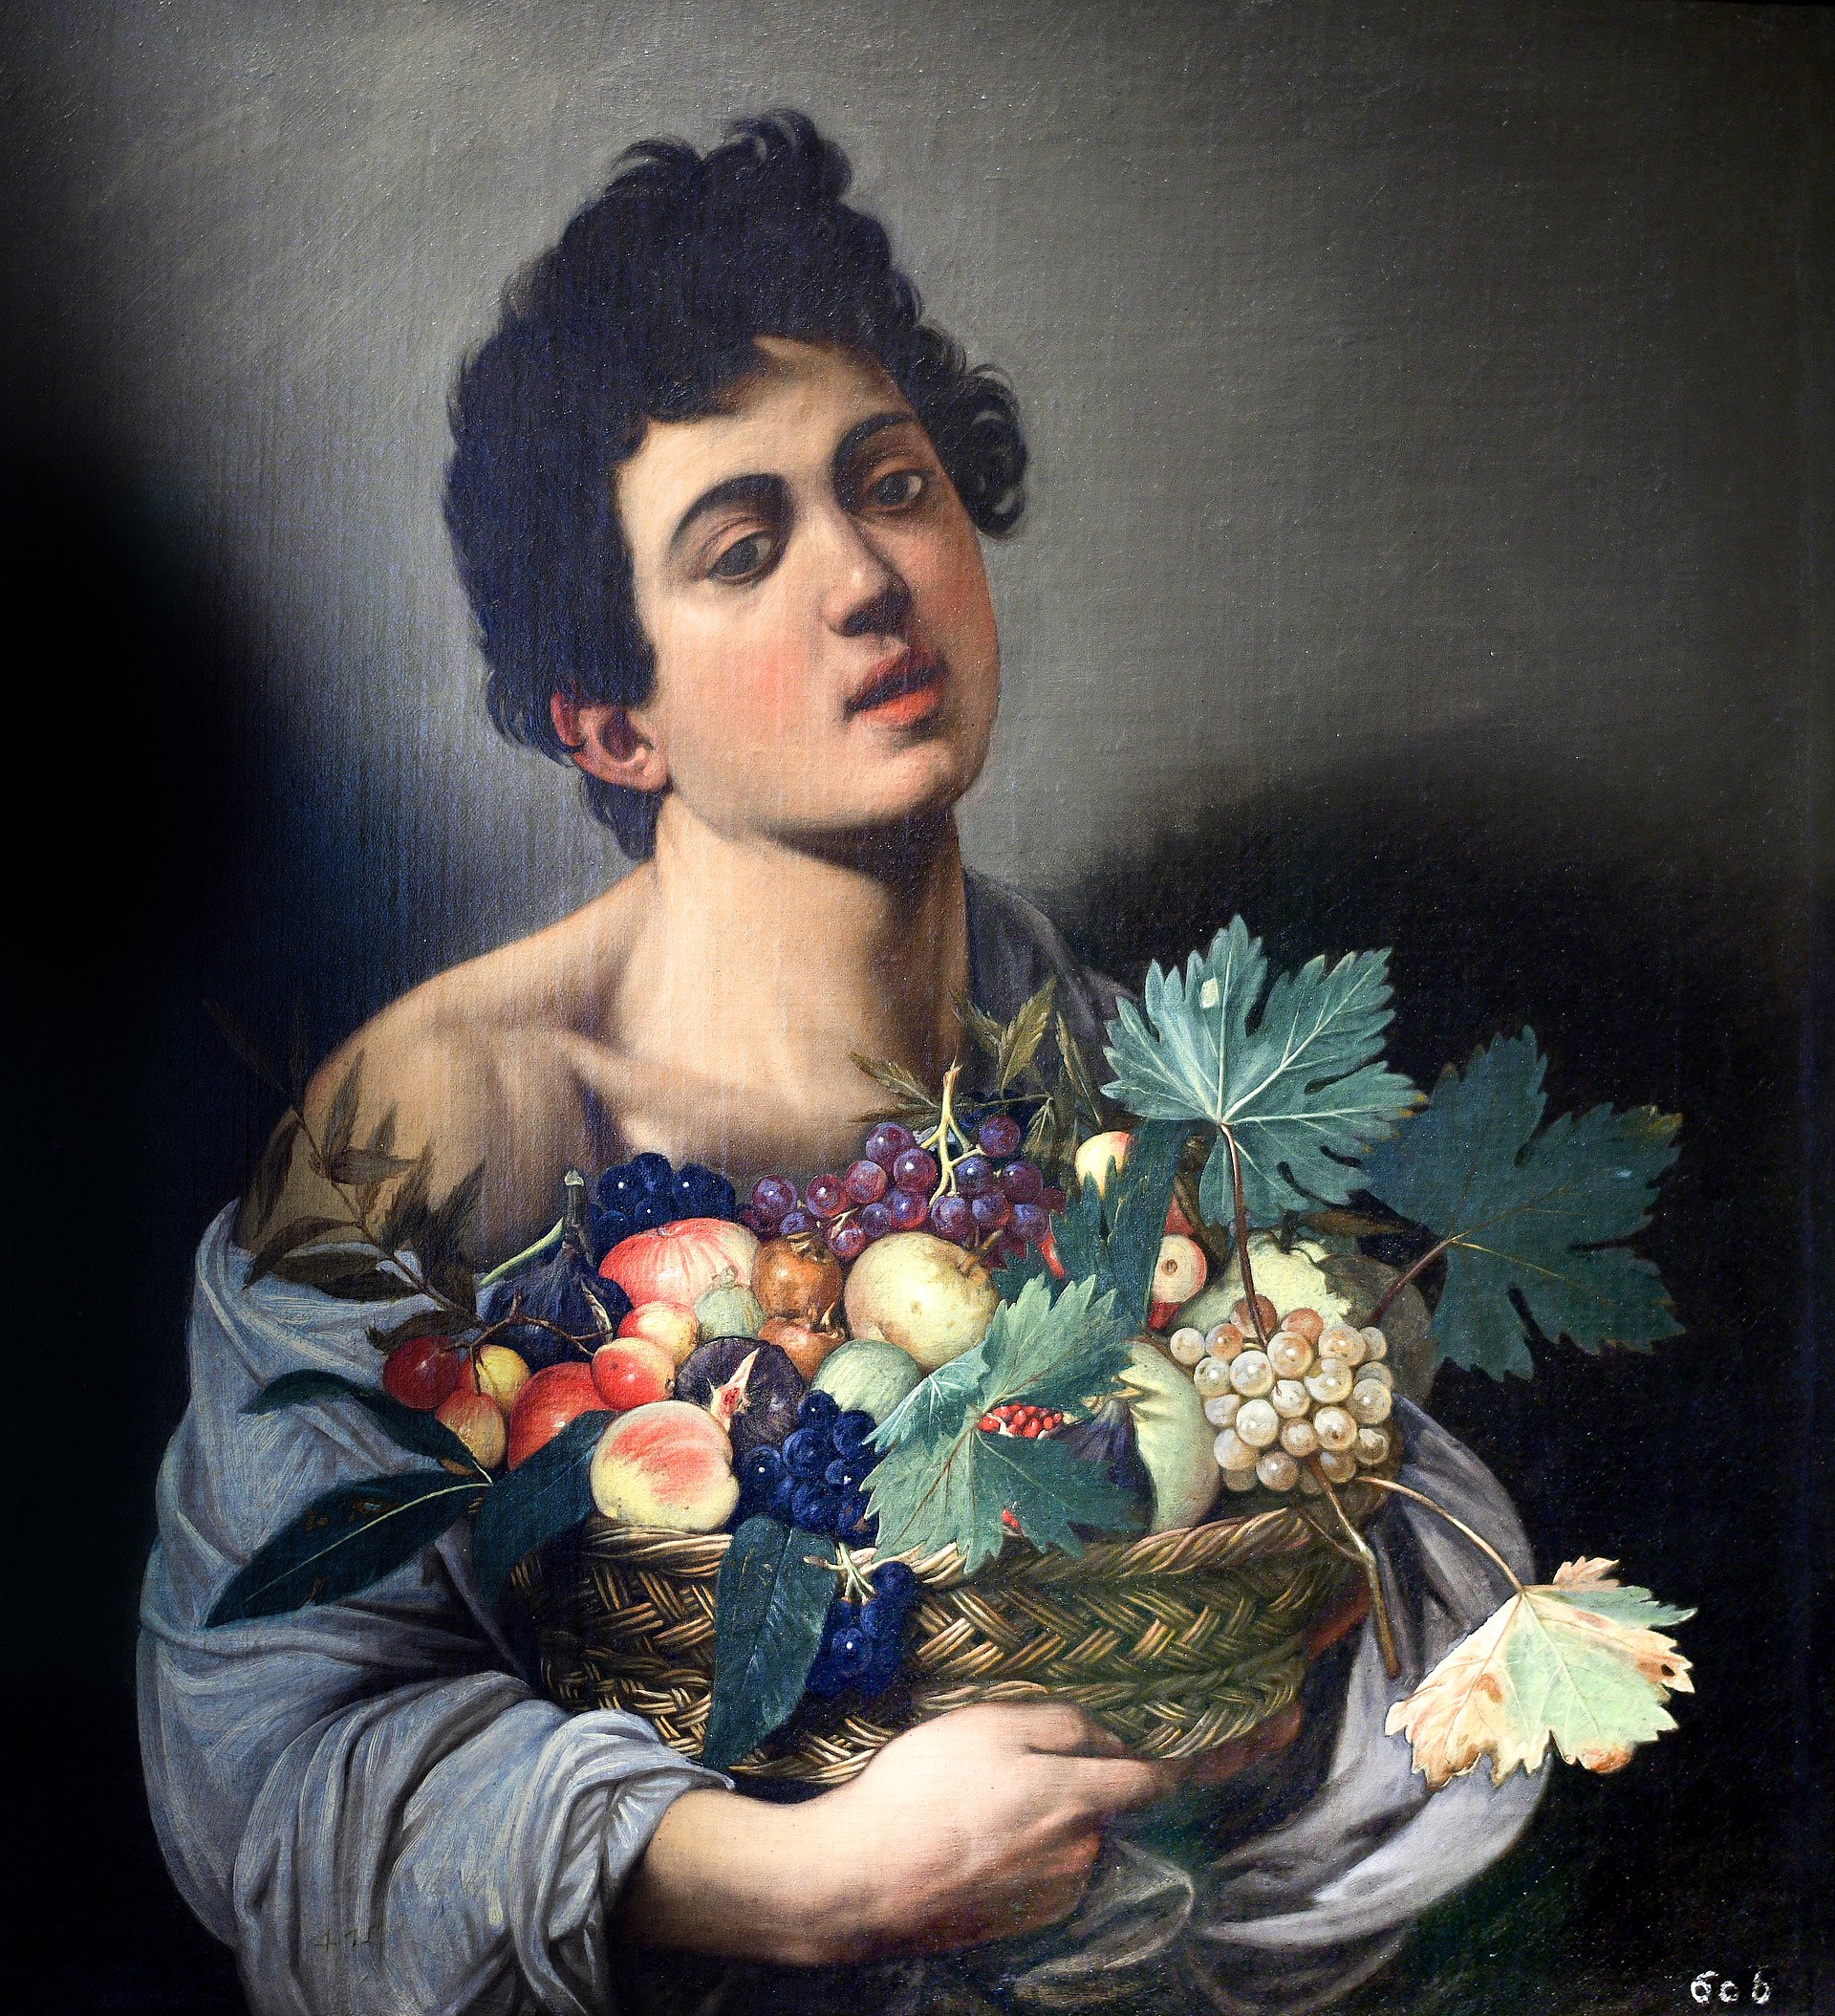 Boy with a Basket of Fruit (1593).